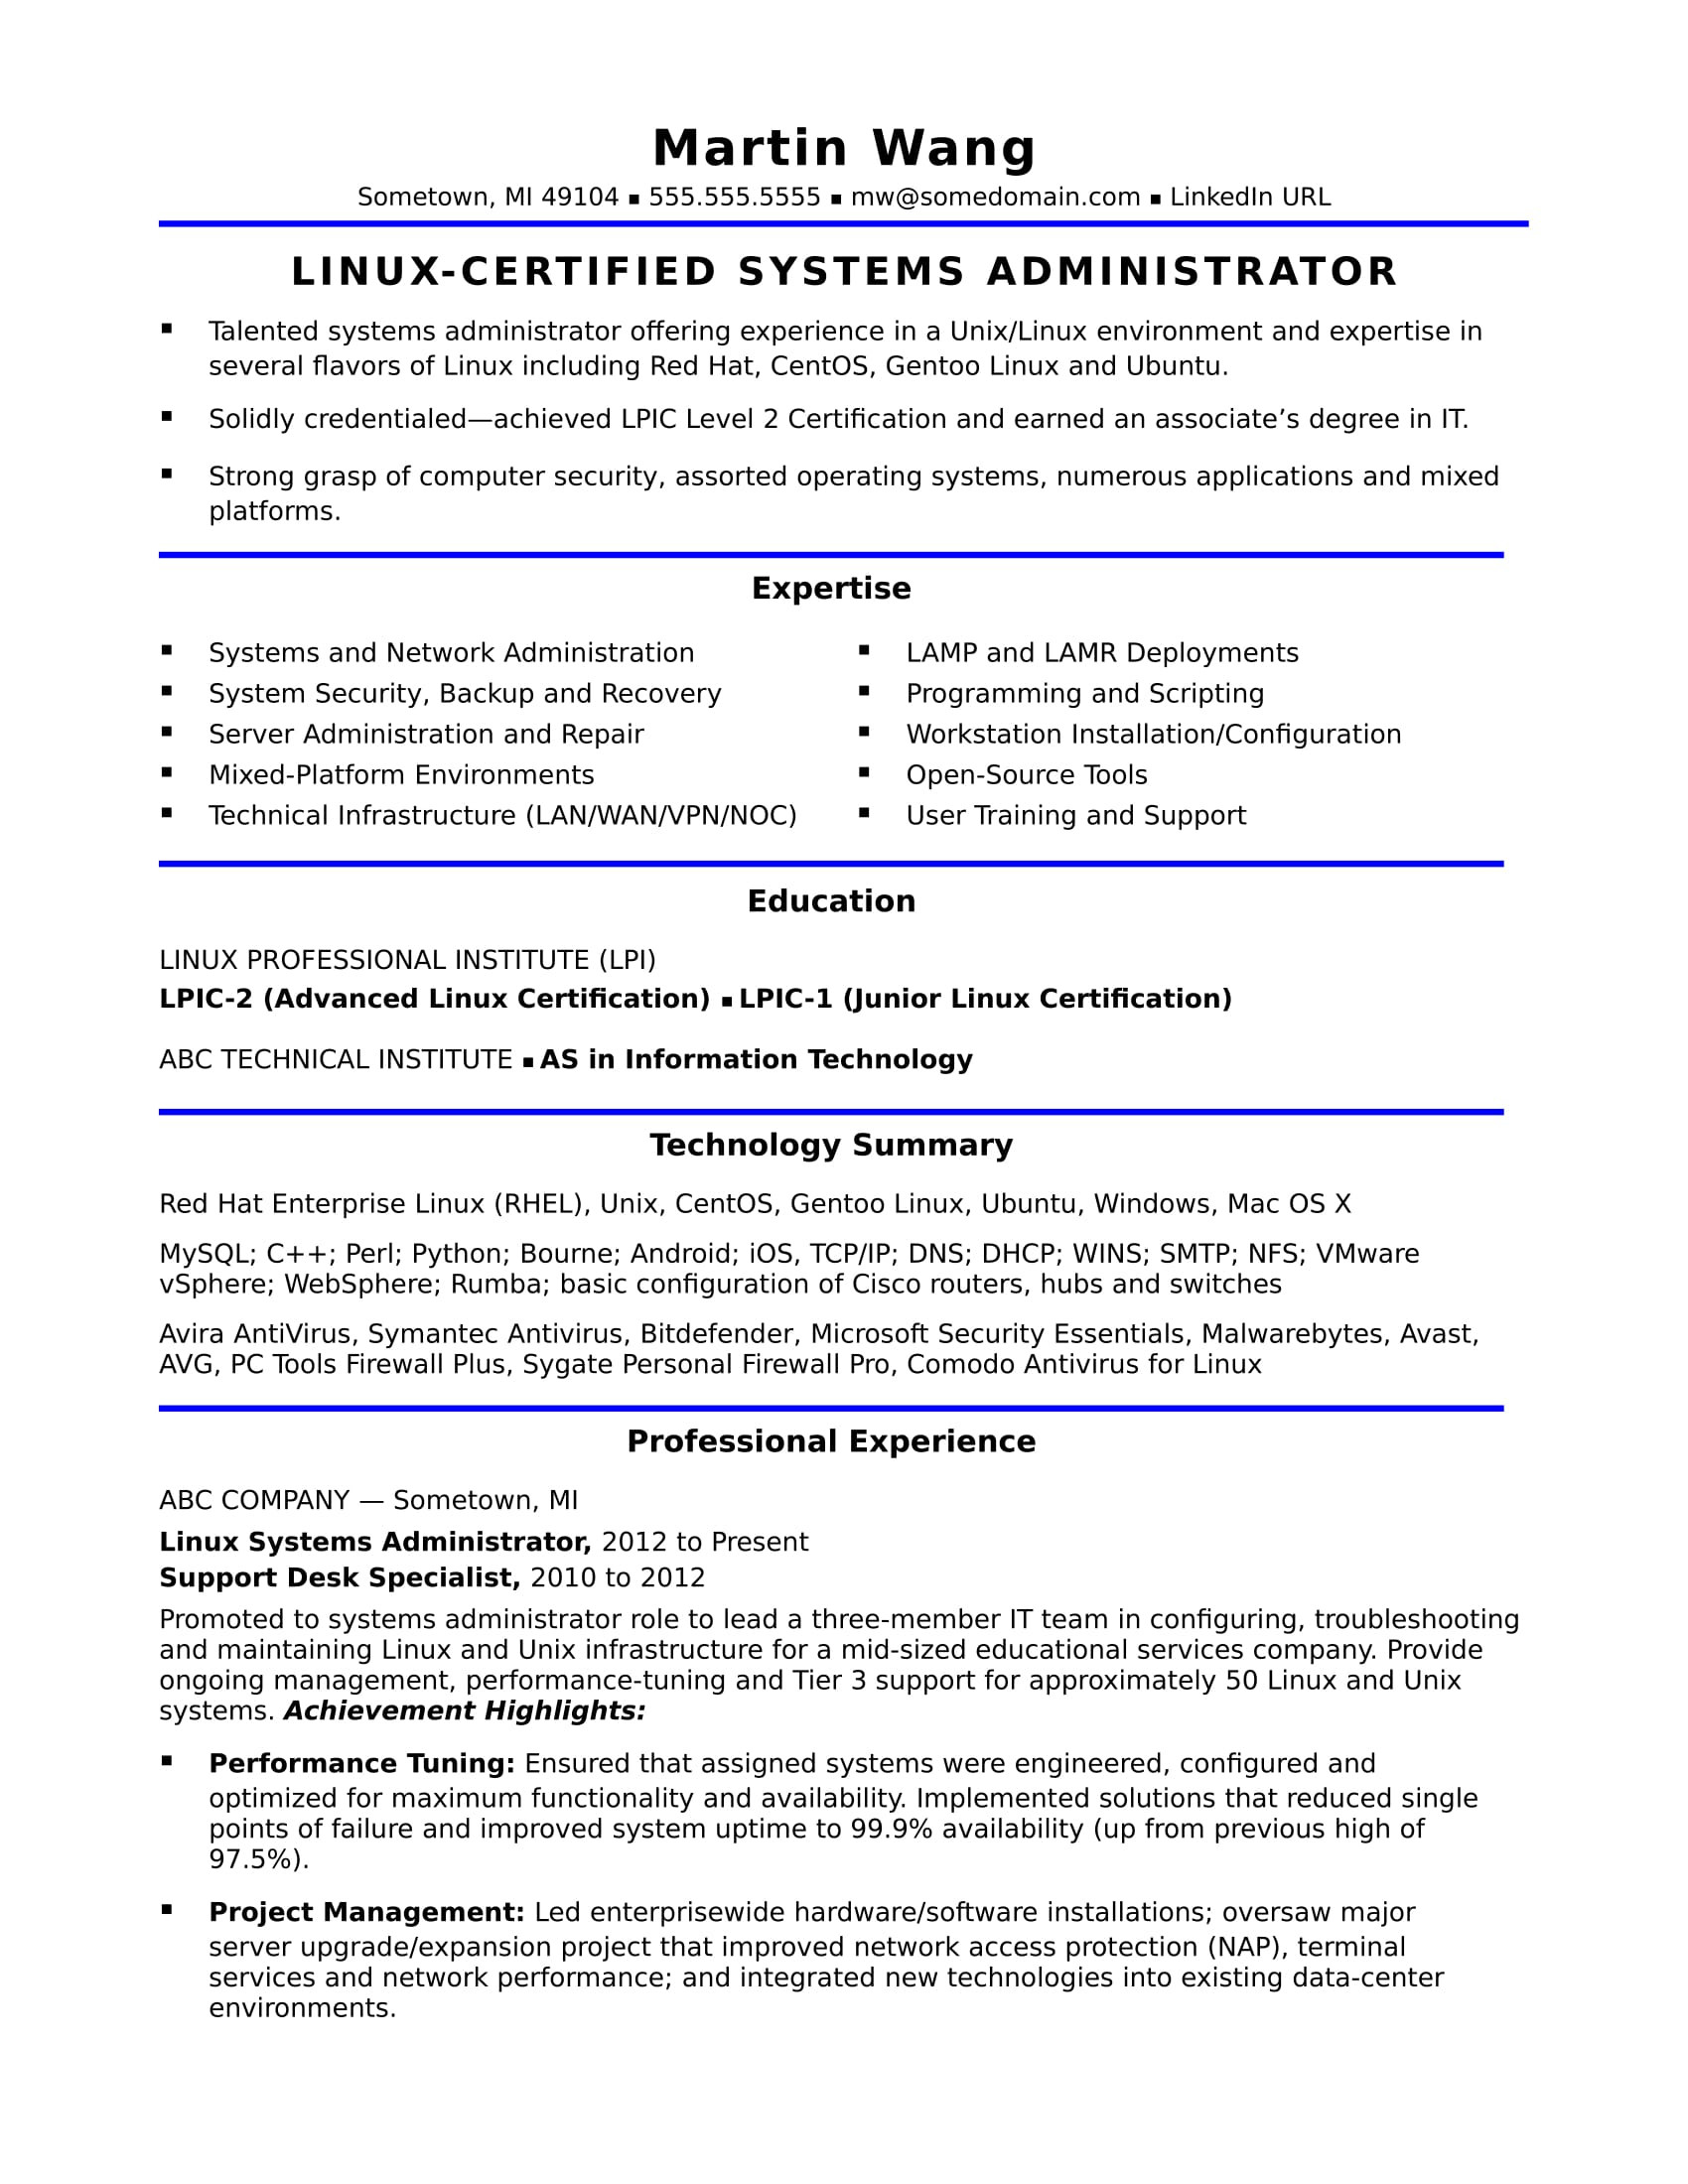 Date Of Availability In Resume Sample Sample Resume for A Midlevel Systems Administrator Monster.com